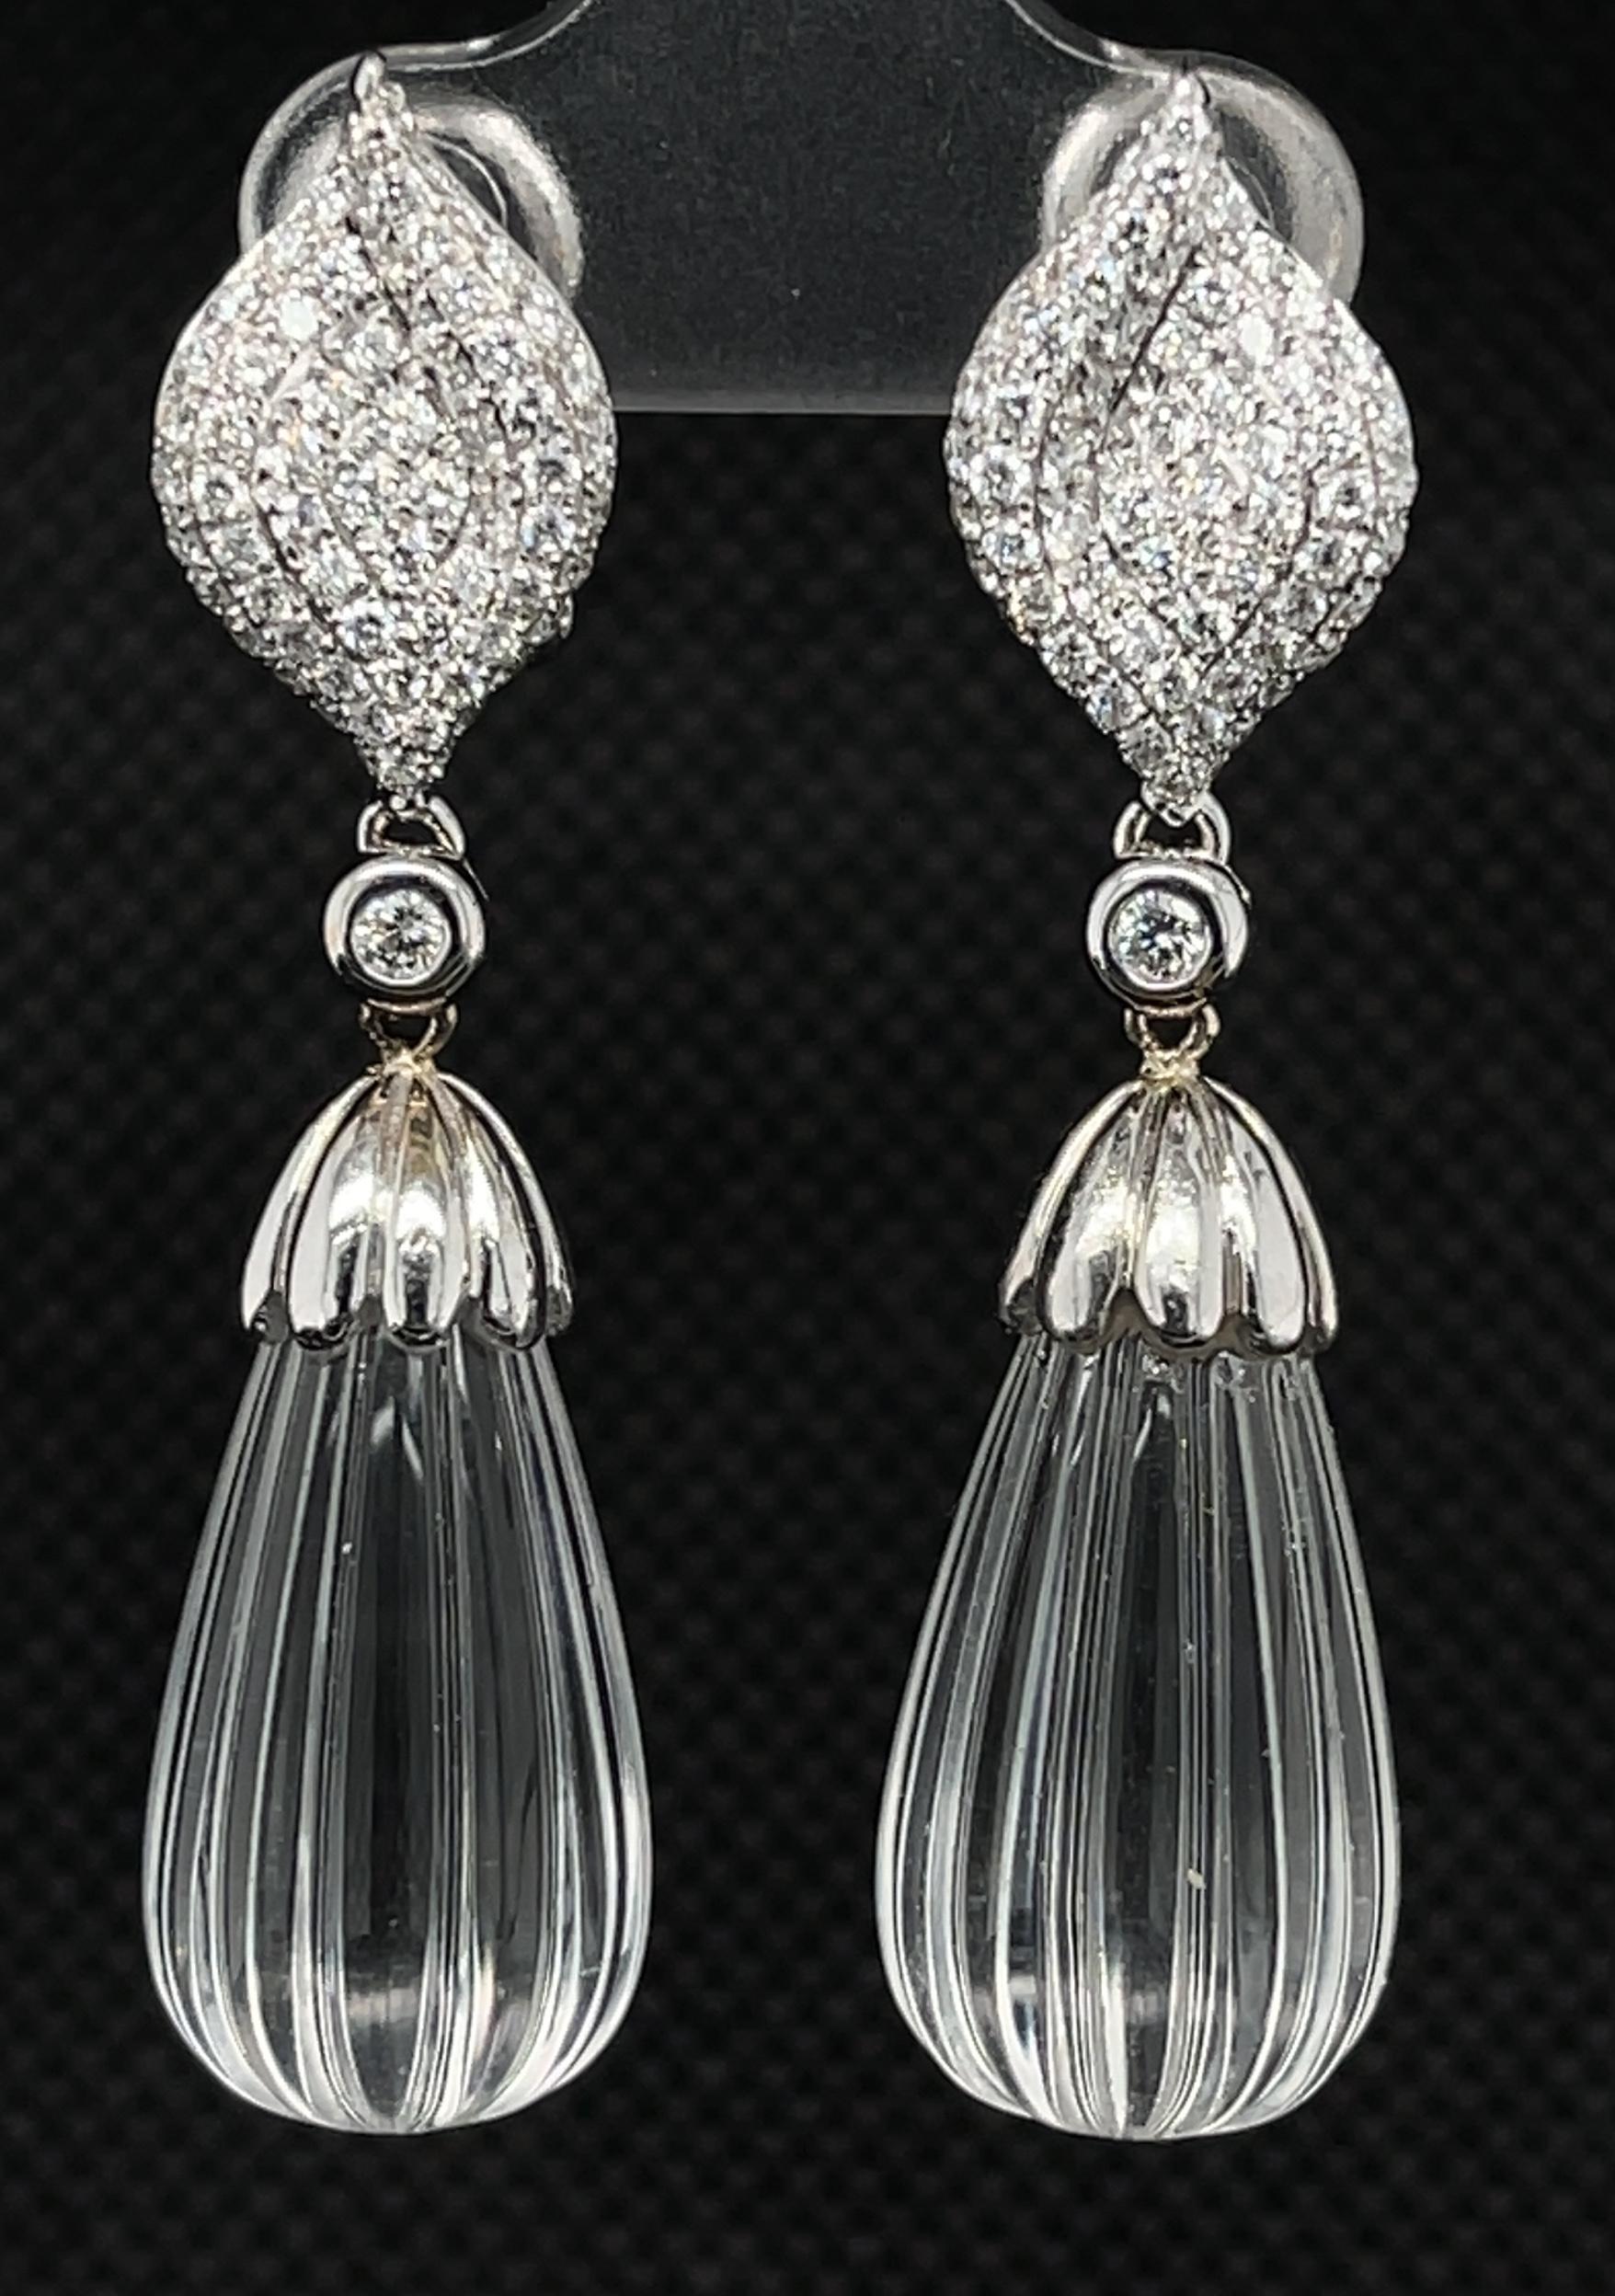 These unusual dangle earrings feature hand-carved rock crystal briolettes dangling from gorgeous 18k white gold diamond pave tops. Over a carat of brilliant white diamonds sparkle in these gorgeous earrings fashioned with French clip backings for